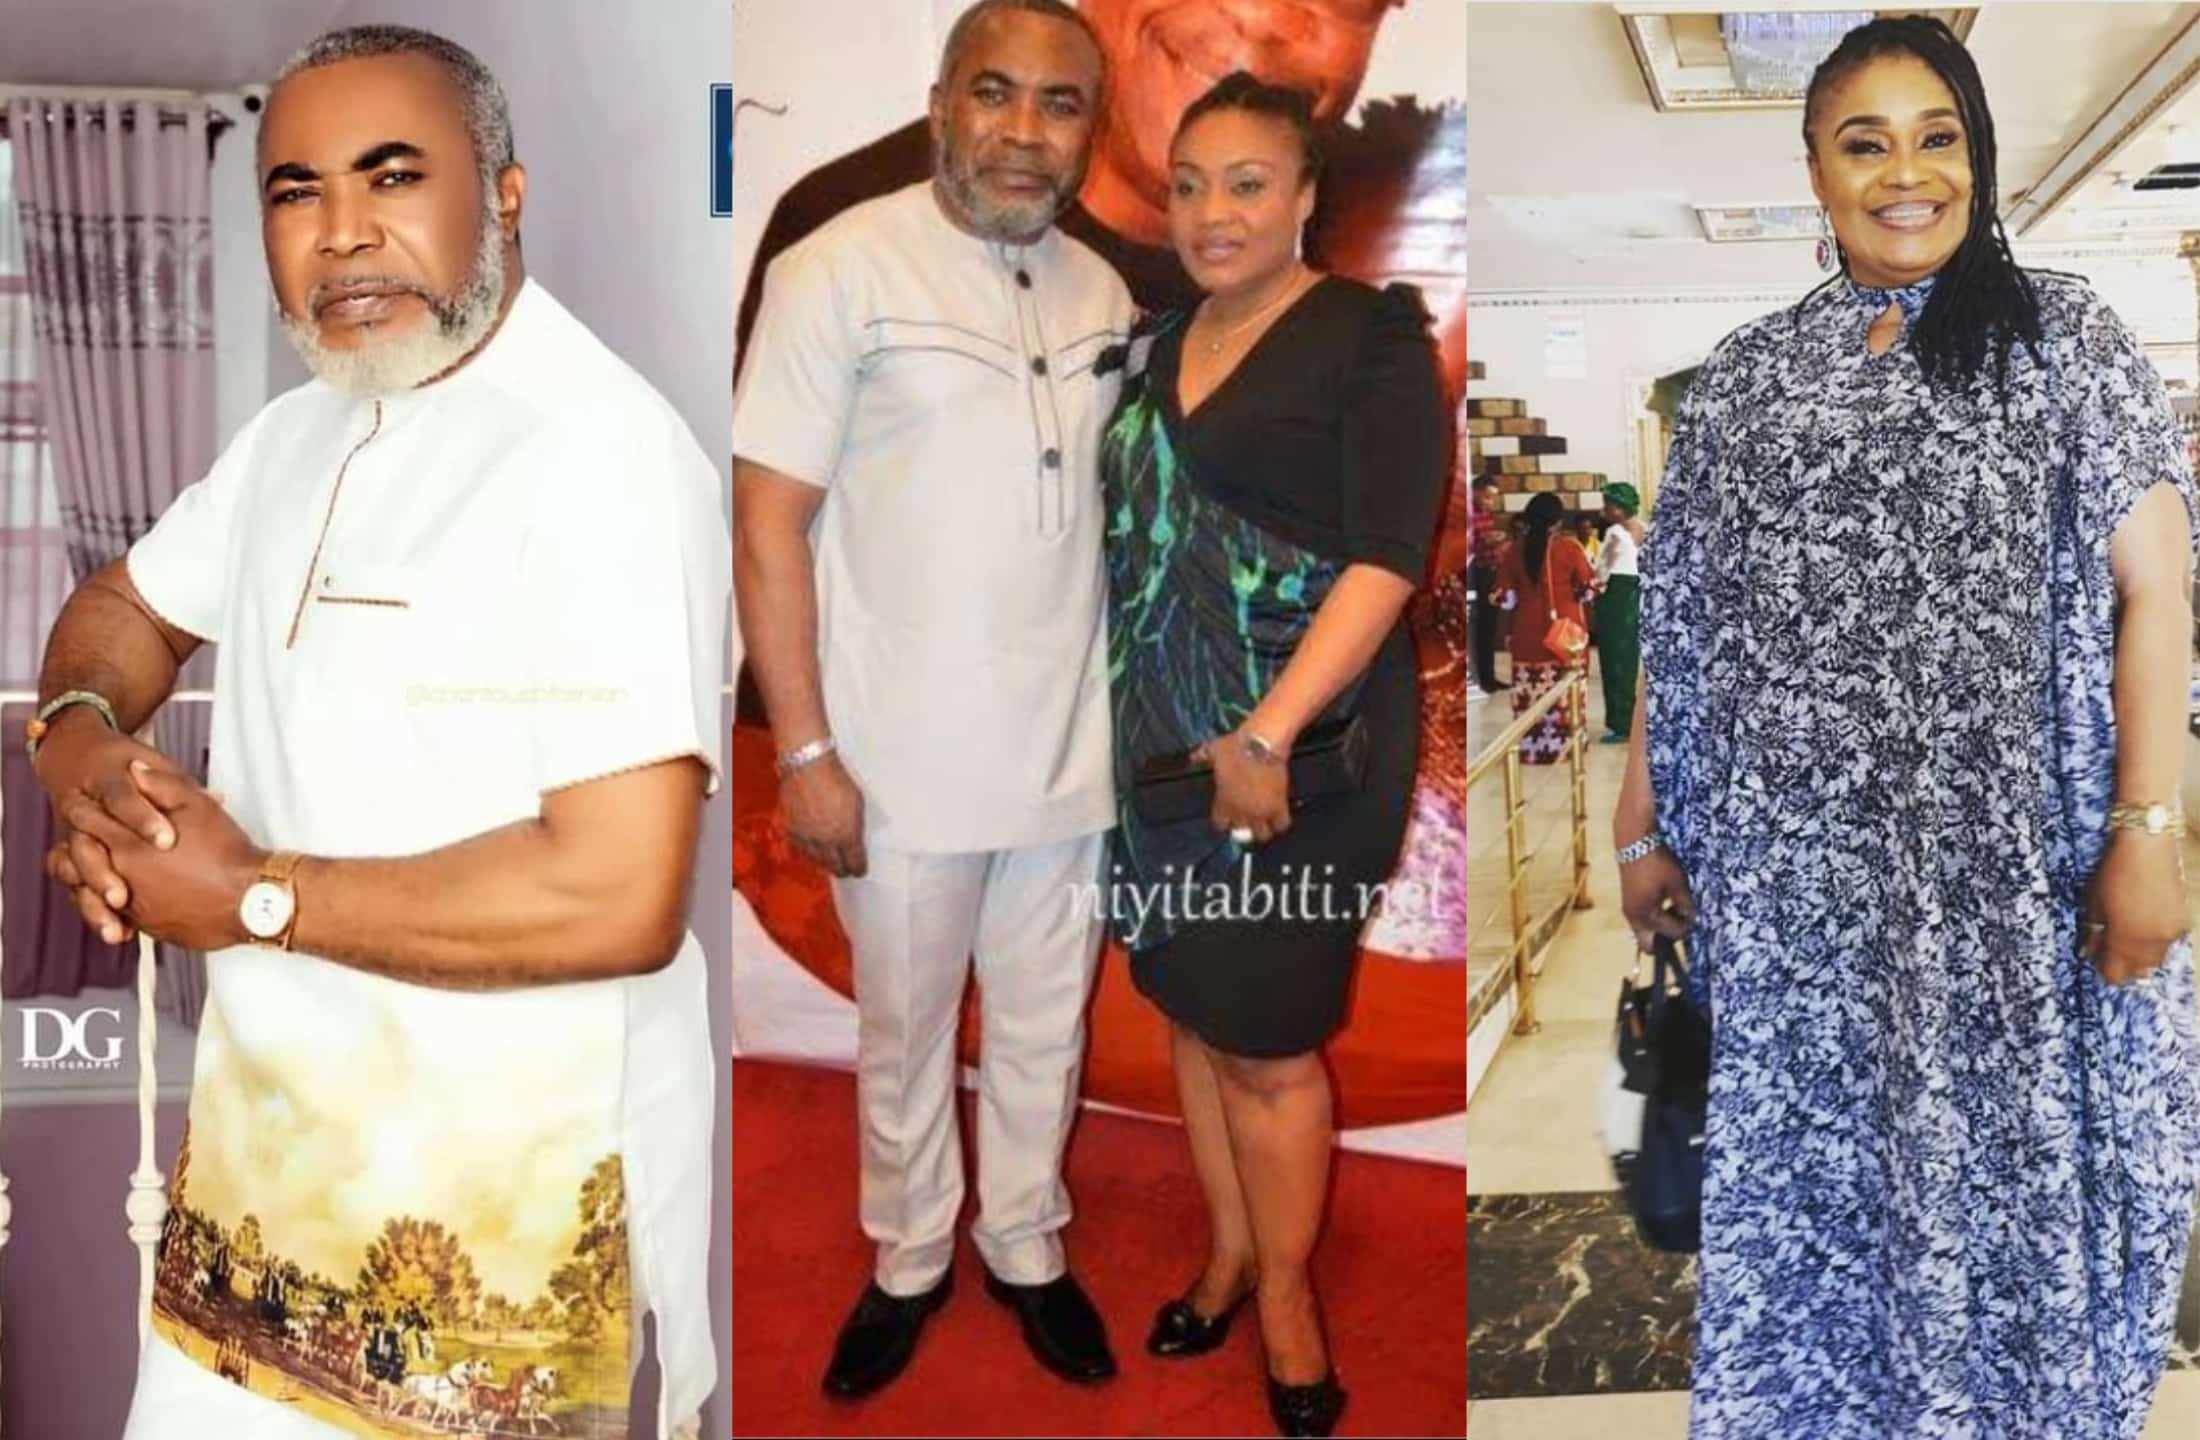 Zack Orji and wife clash over presidential choice